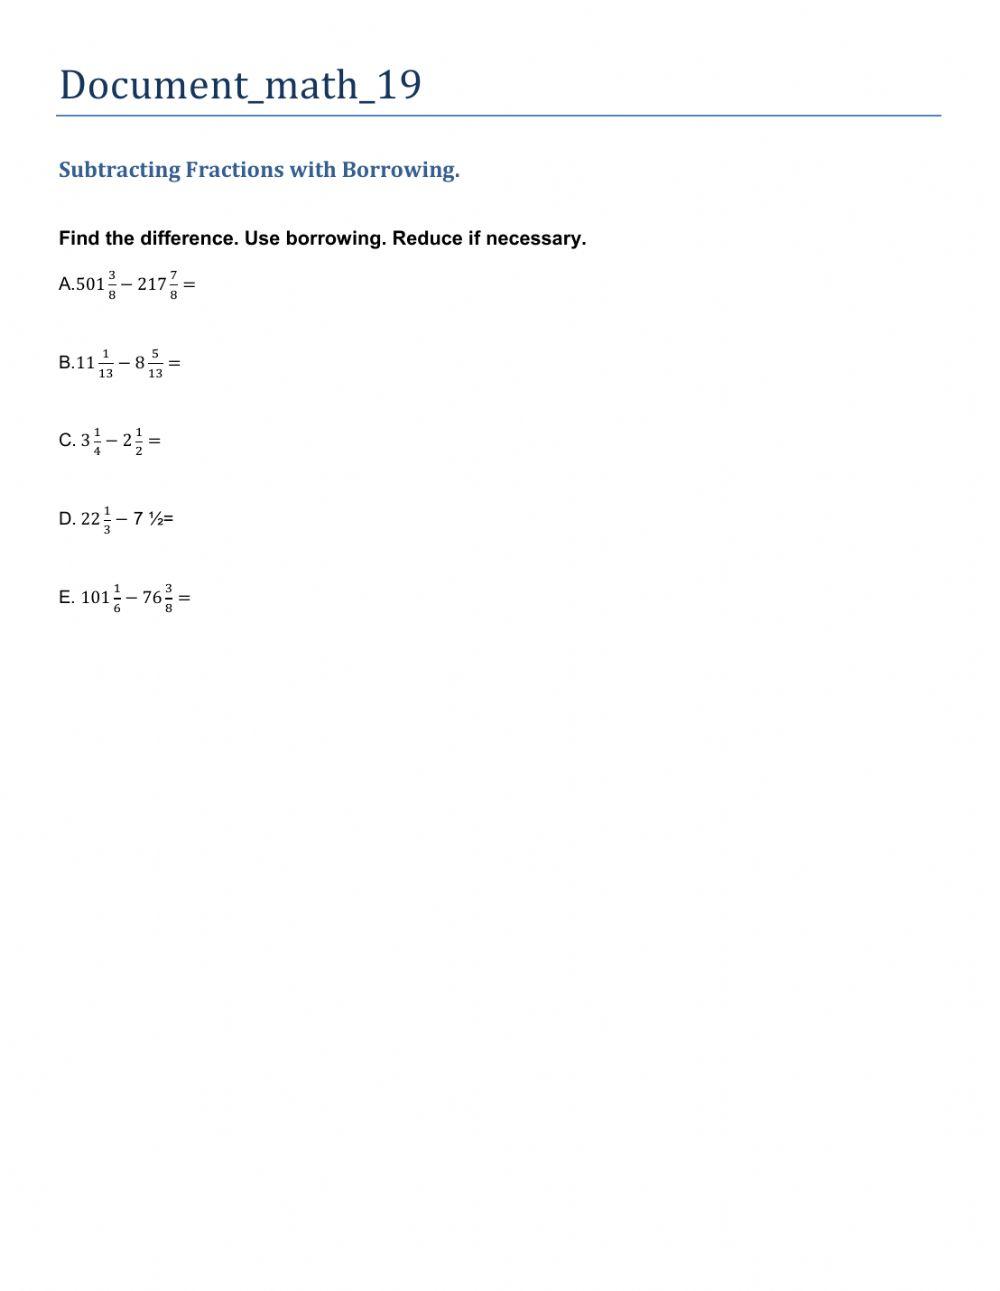 Subtracting with borrowing document-math-19